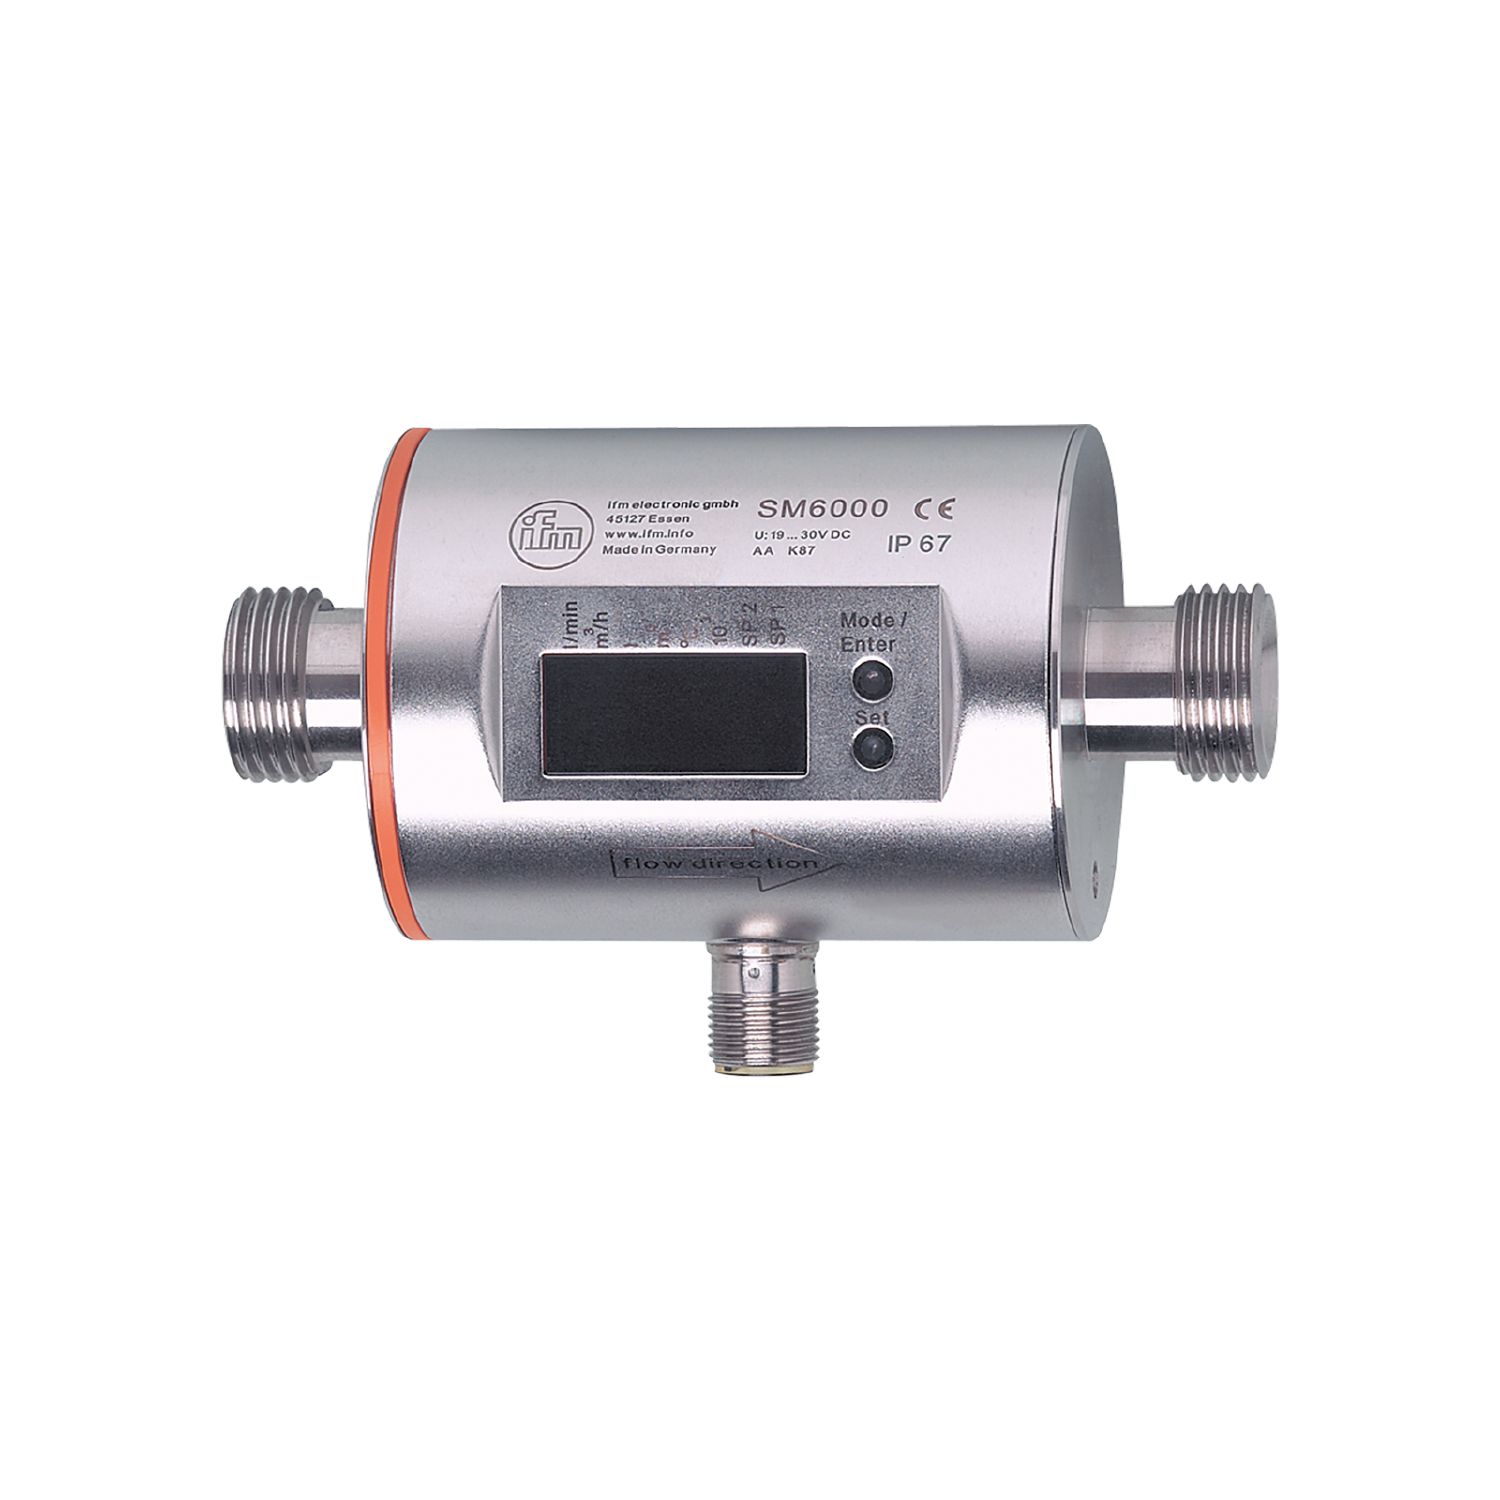 OR44 IFM ELECTRONIC GMBH SM6004 MAGNETIC FLOW METER IP 67 4..20MA 20..30VDC 